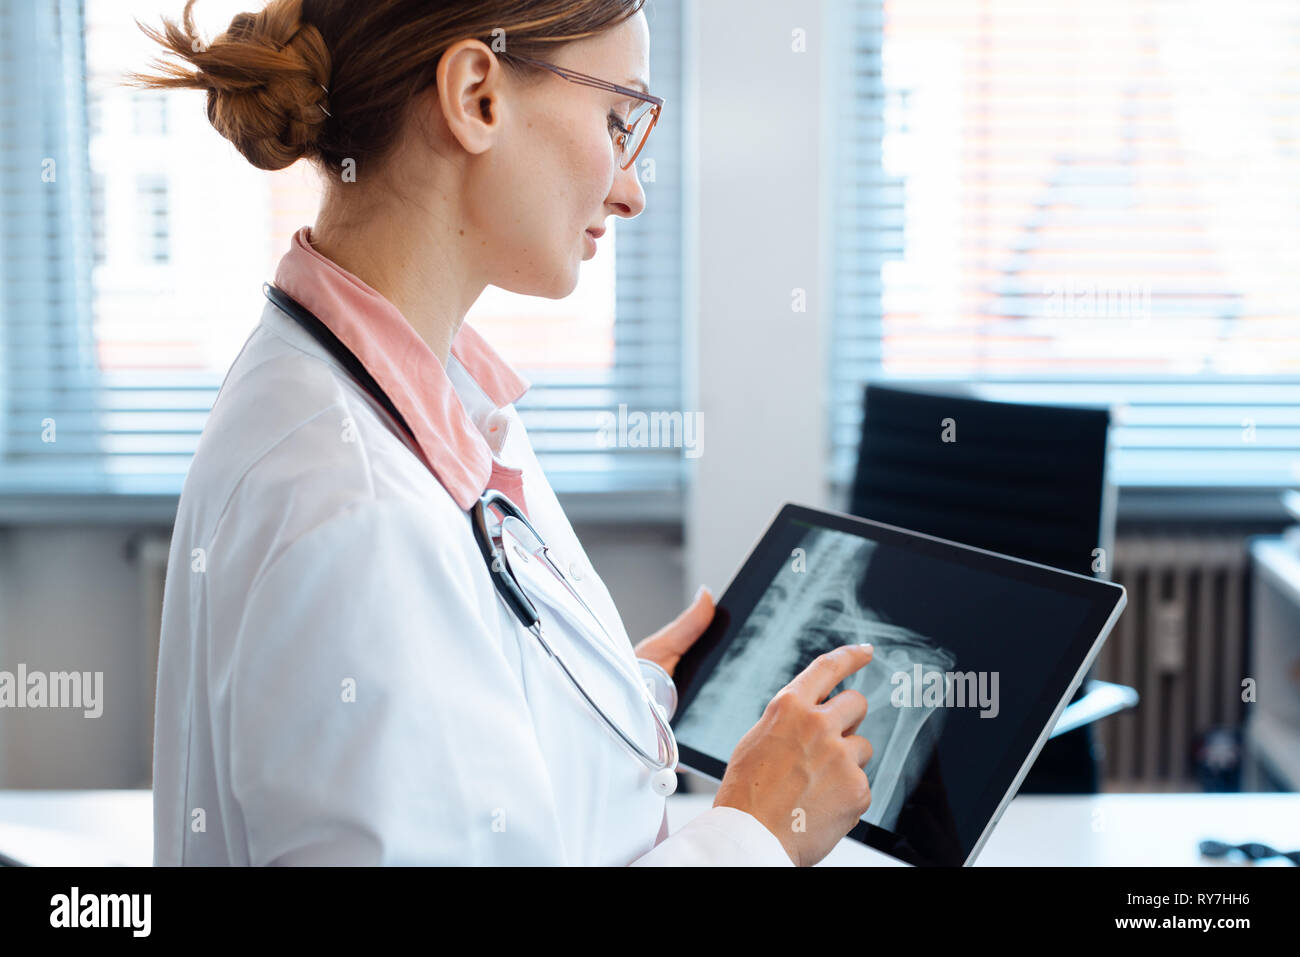 Doctor looking at x-ray picture of a shoulder on her tablet computer Stock Photo